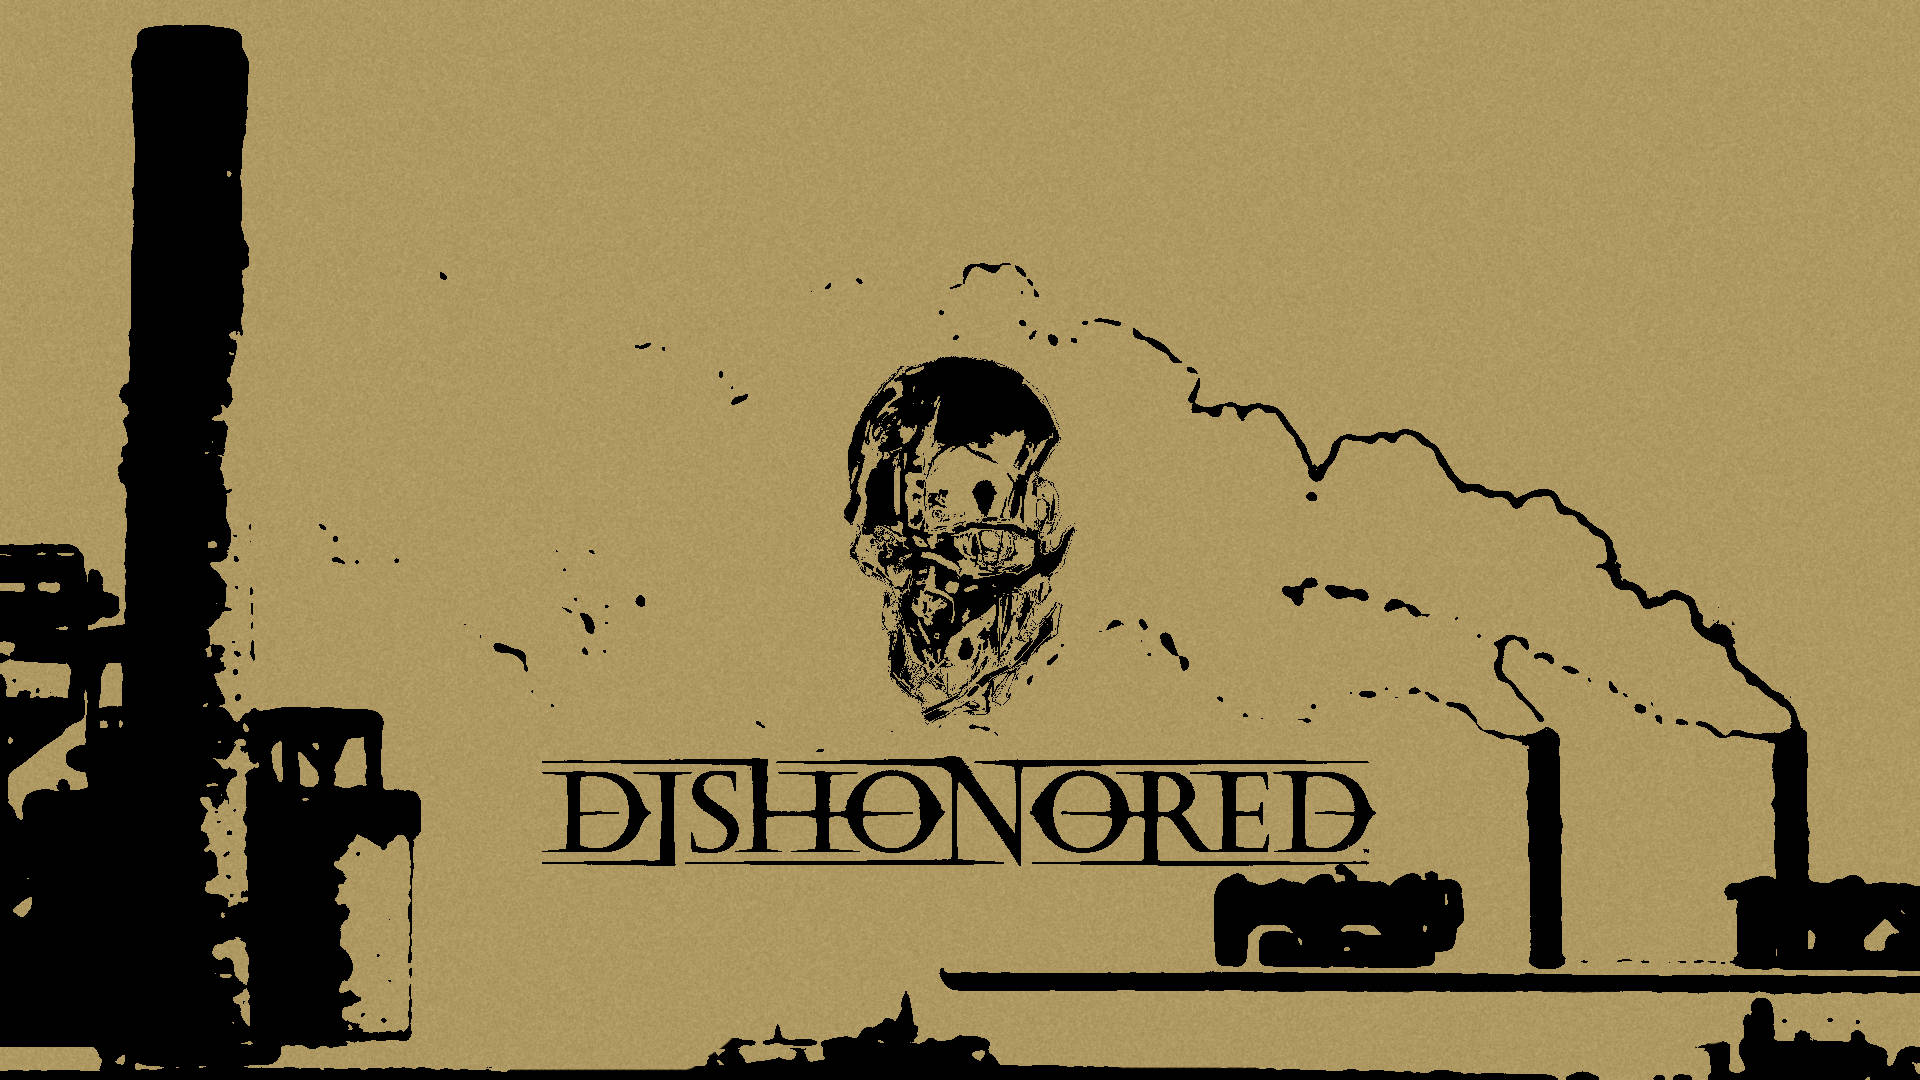 Dishonored Game Artwork Background